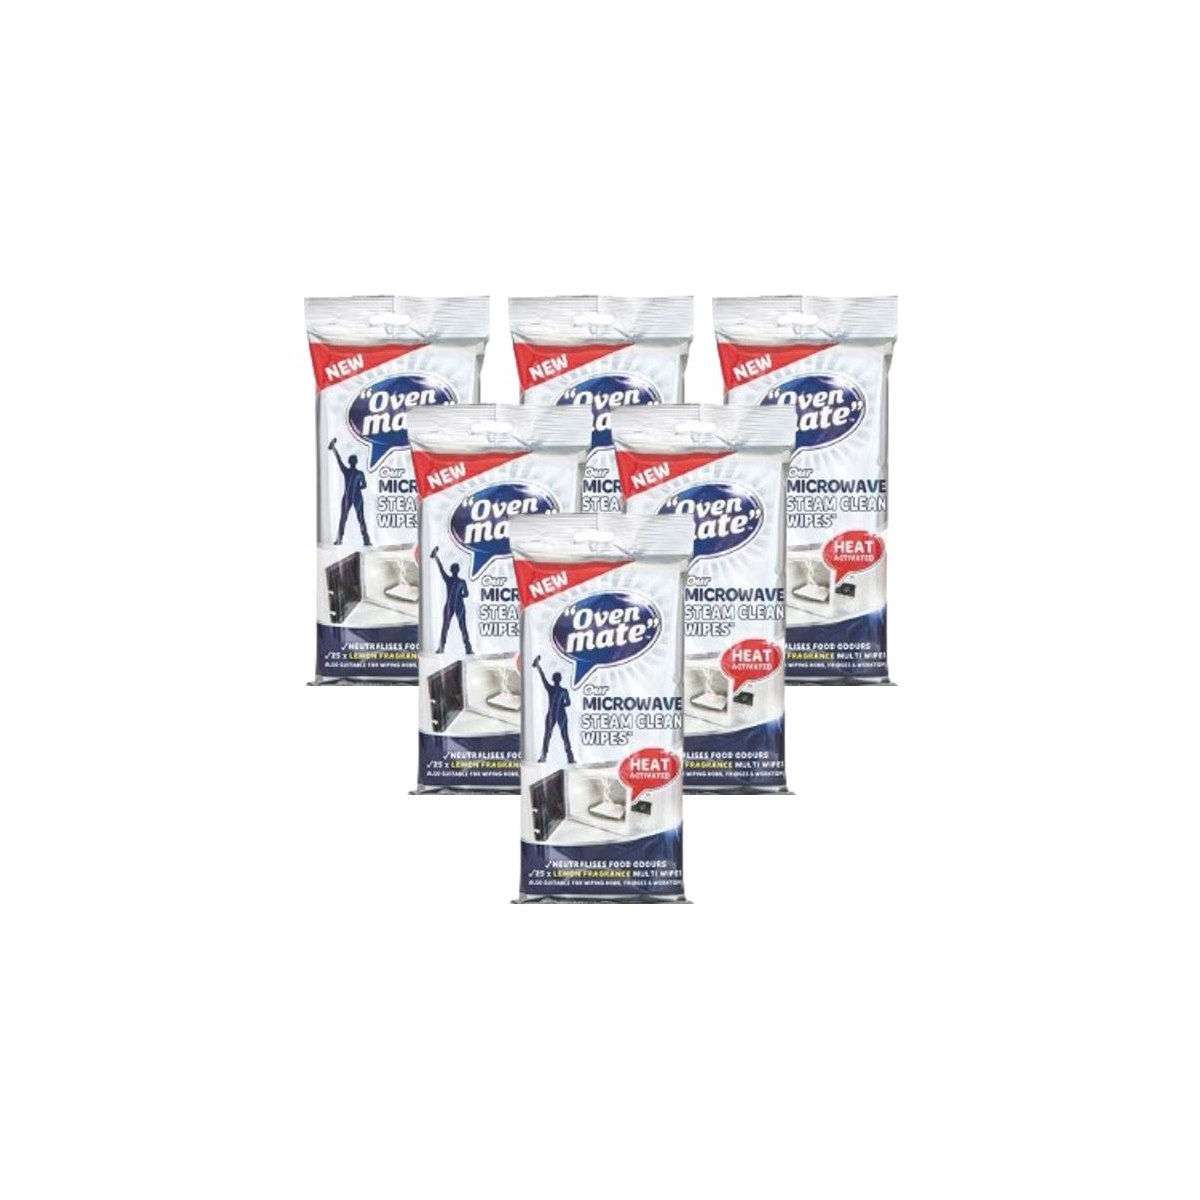 Case of 6 x Oven Mate  Microwave Steam Clean Wipes 25 Pack